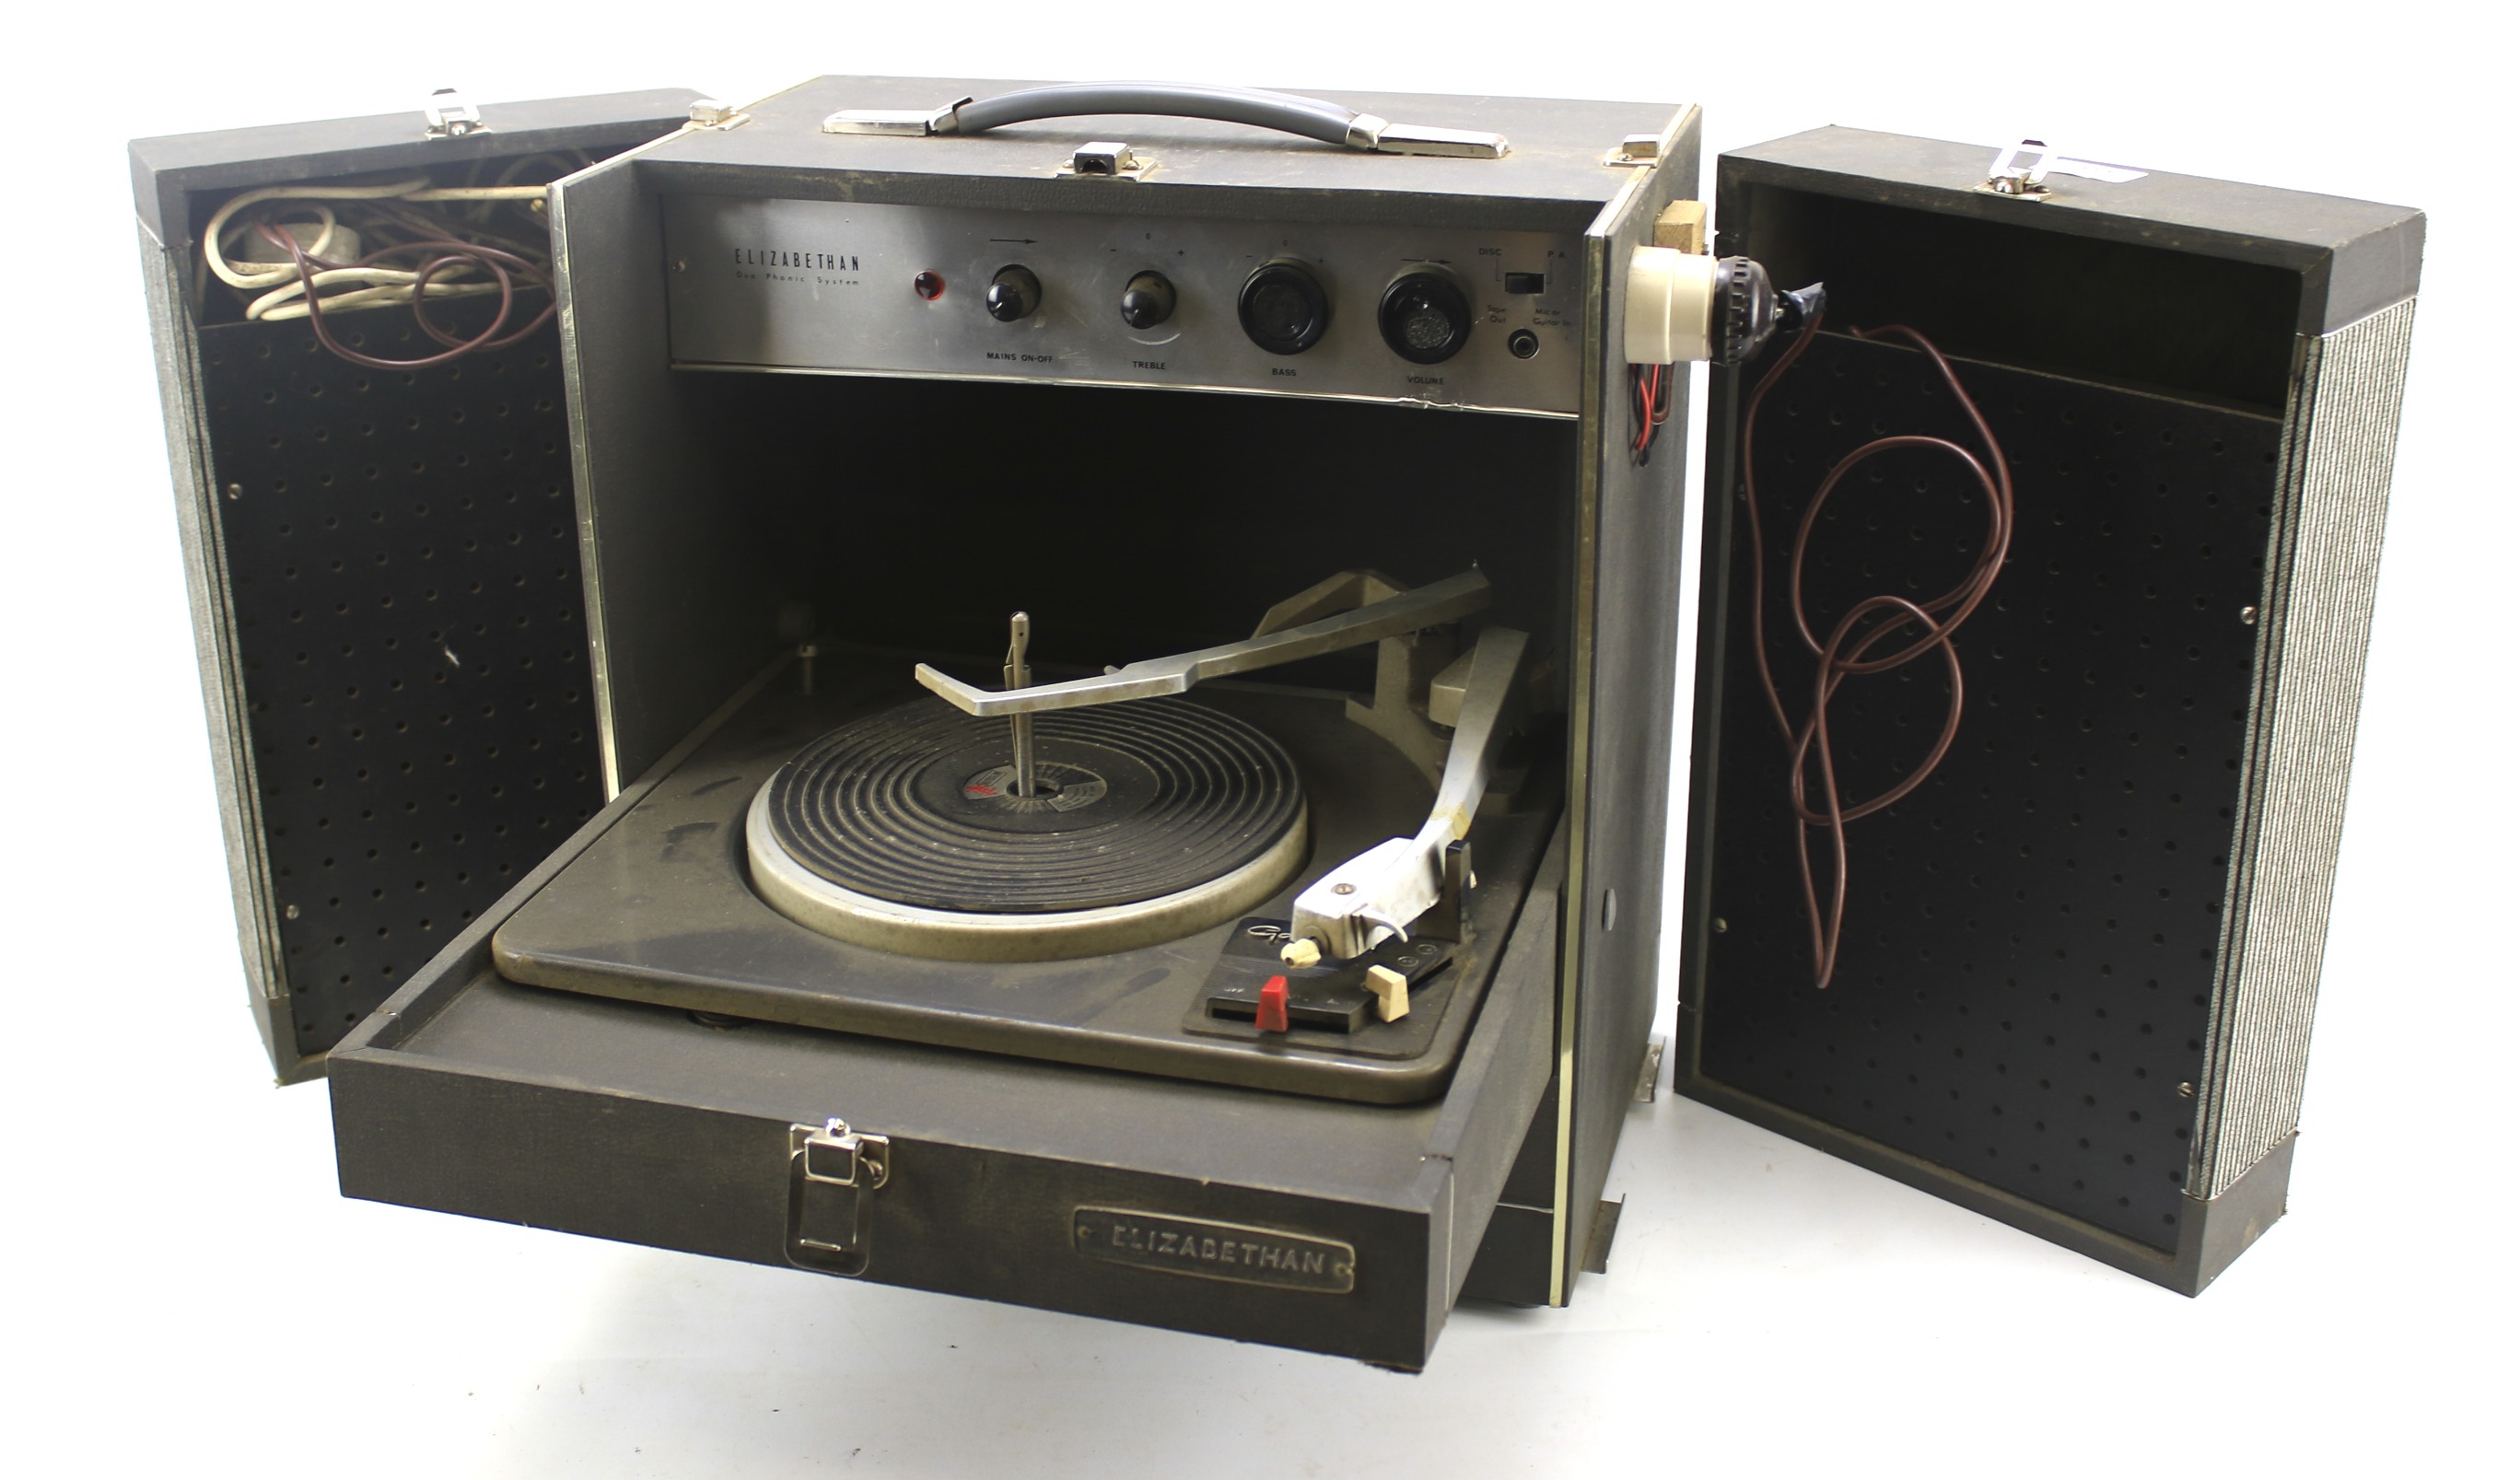 A vintage Elizabethan duo phonic record deck system.